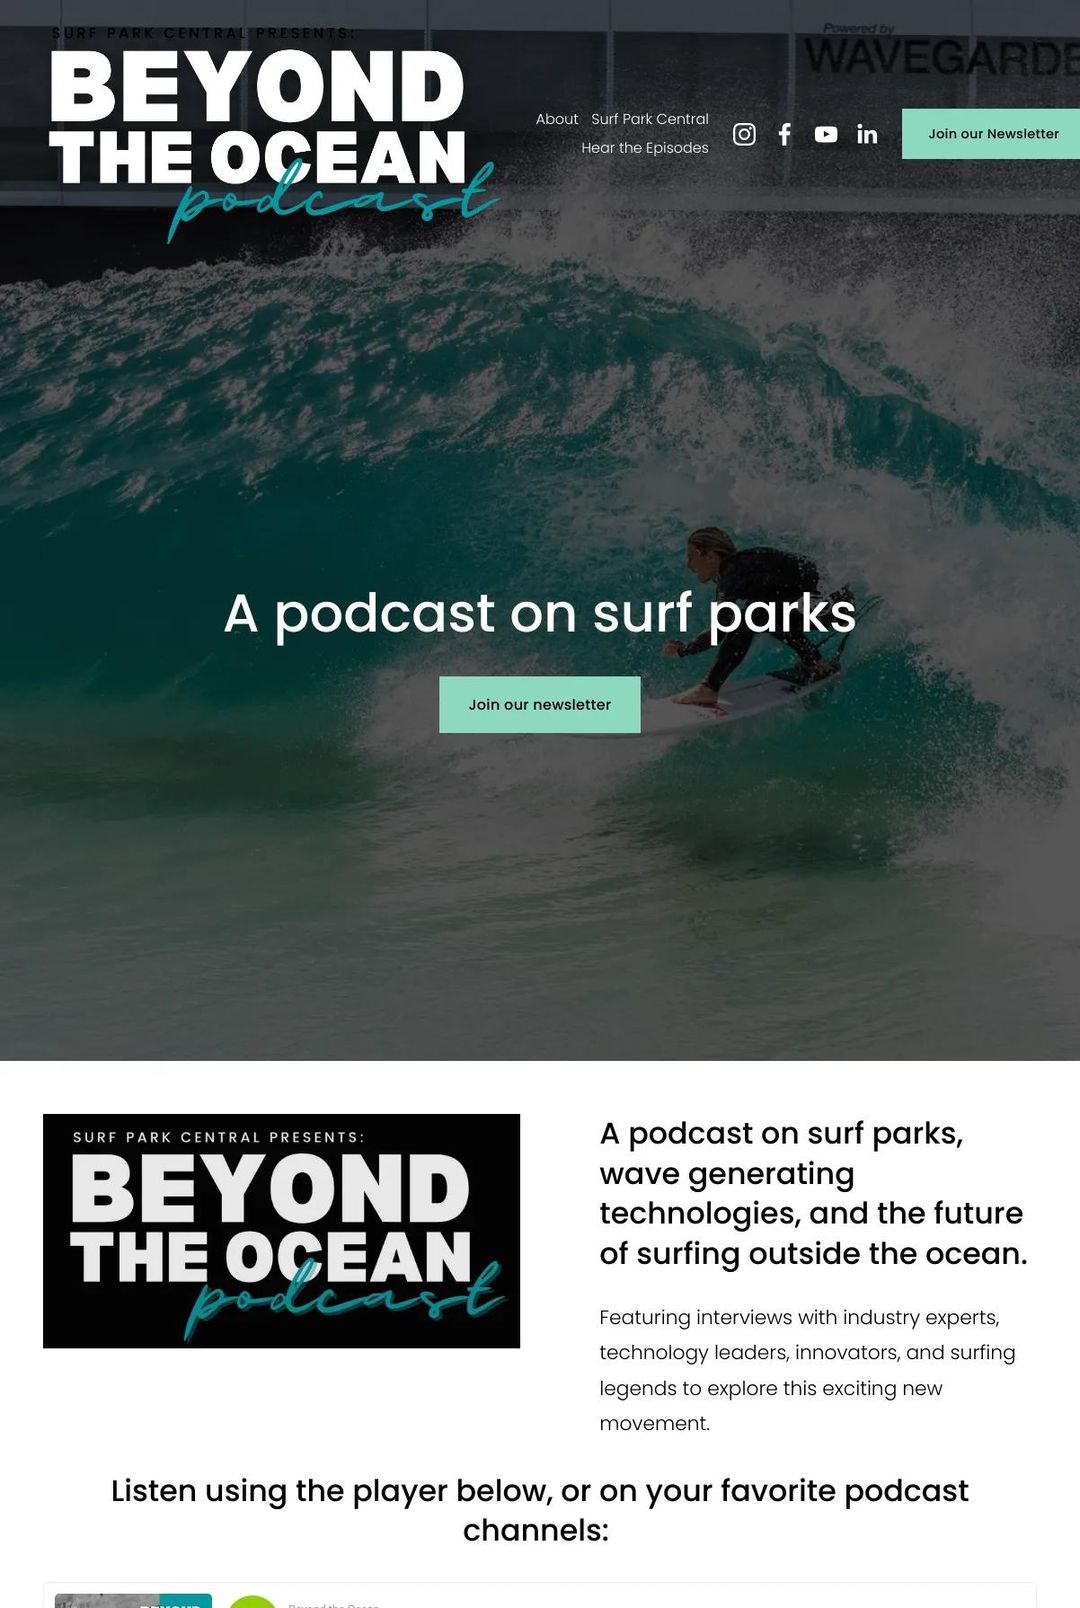 Screenshot 1 of Beyond the Ocean Podcast (Example Squarespace Podcast Website)